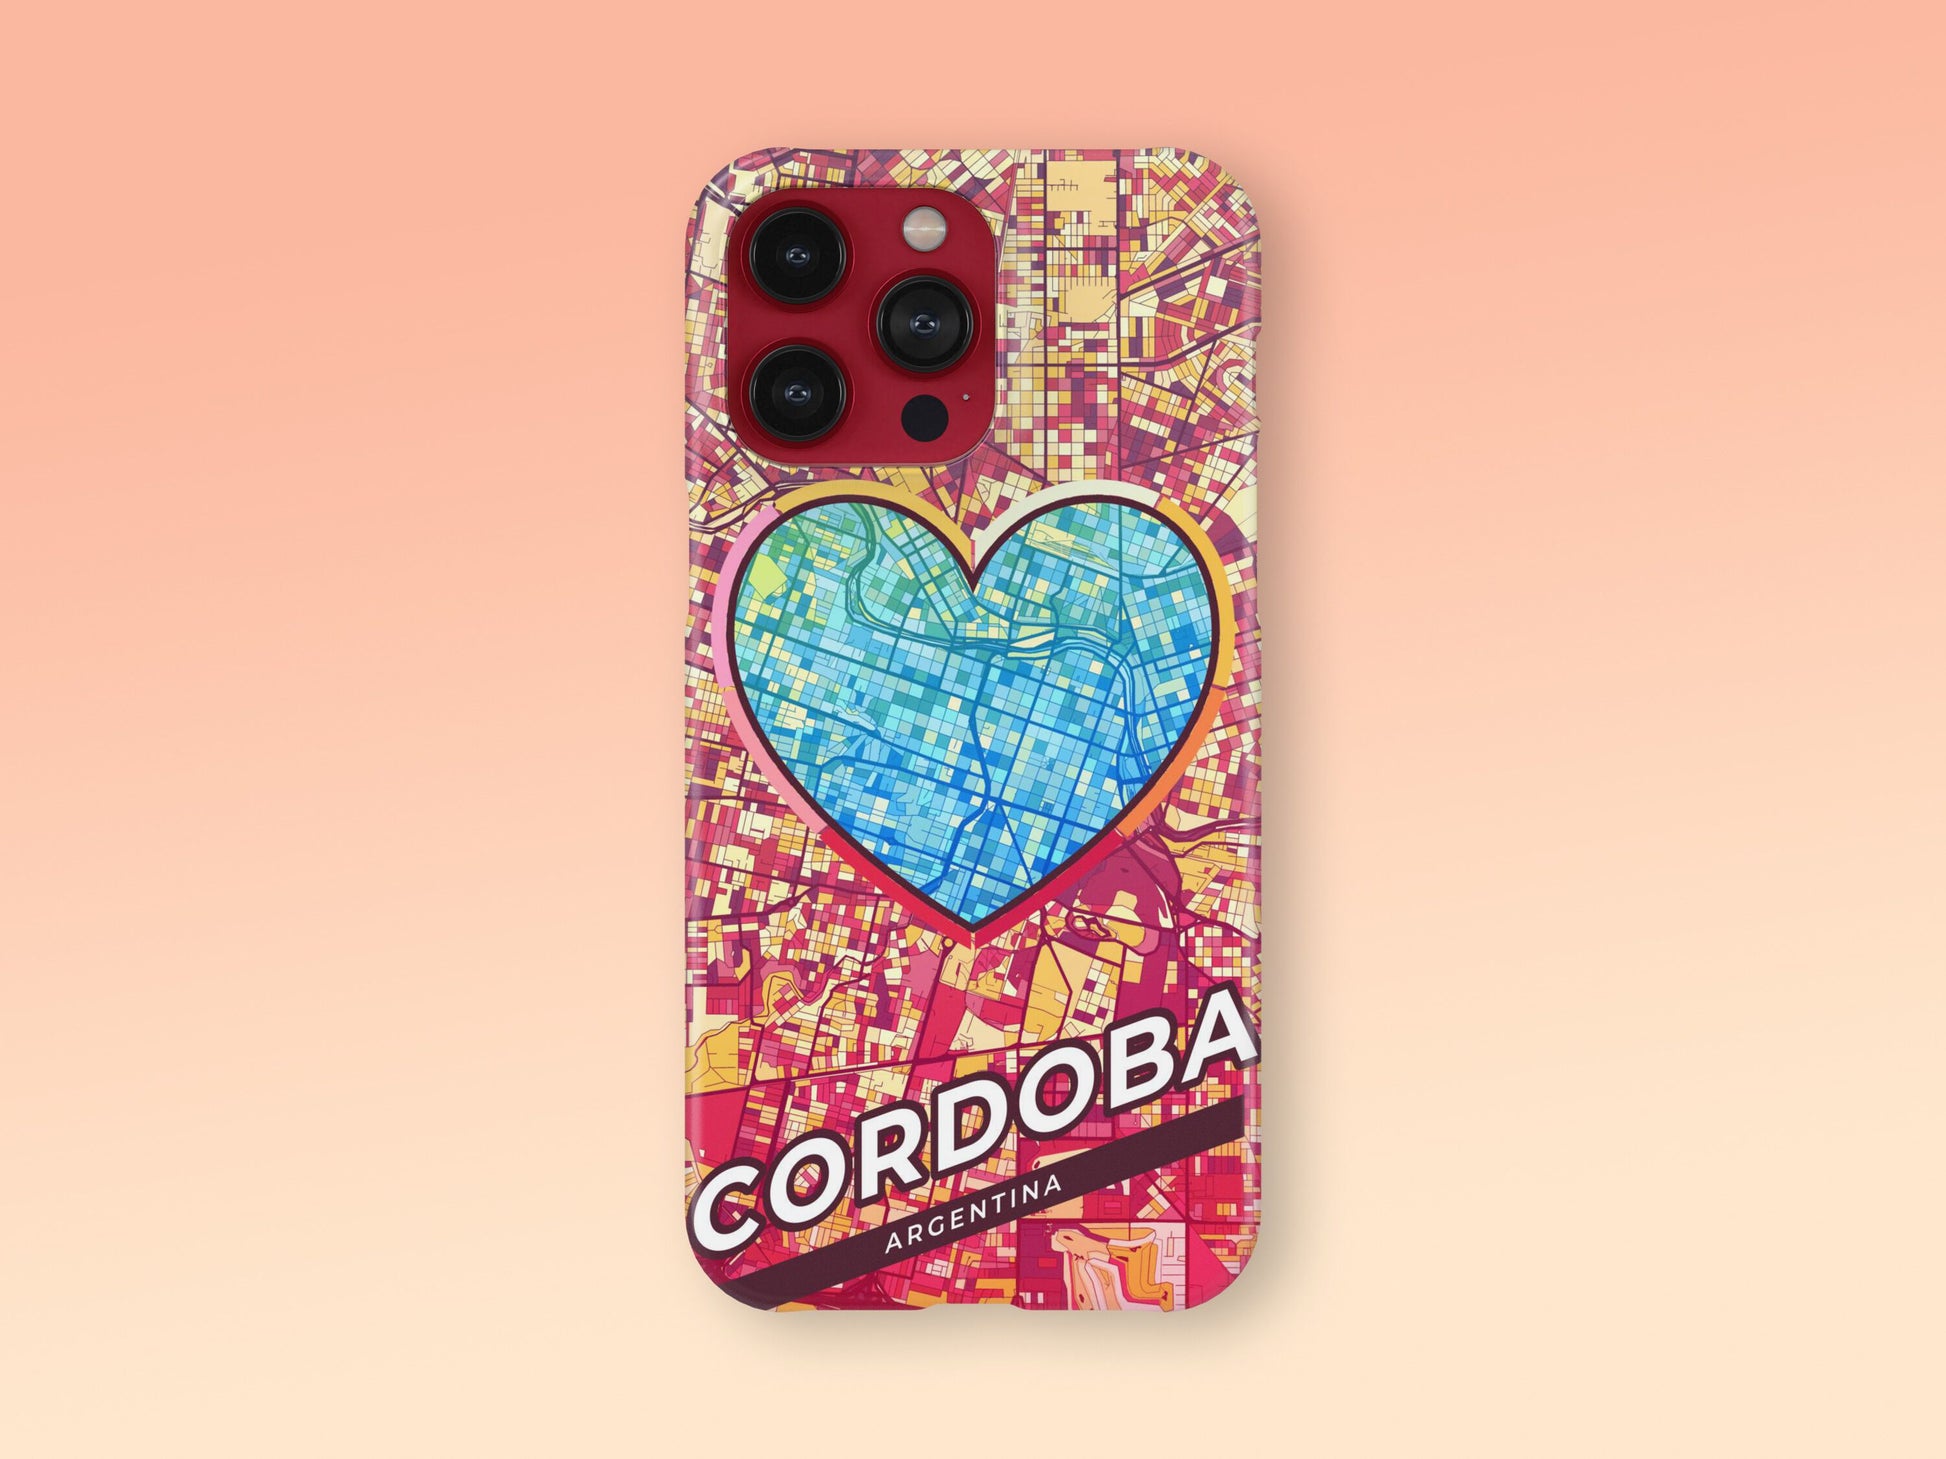 Cordoba Argentina slim phone case with colorful icon. Birthday, wedding or housewarming gift. Couple match cases. 2